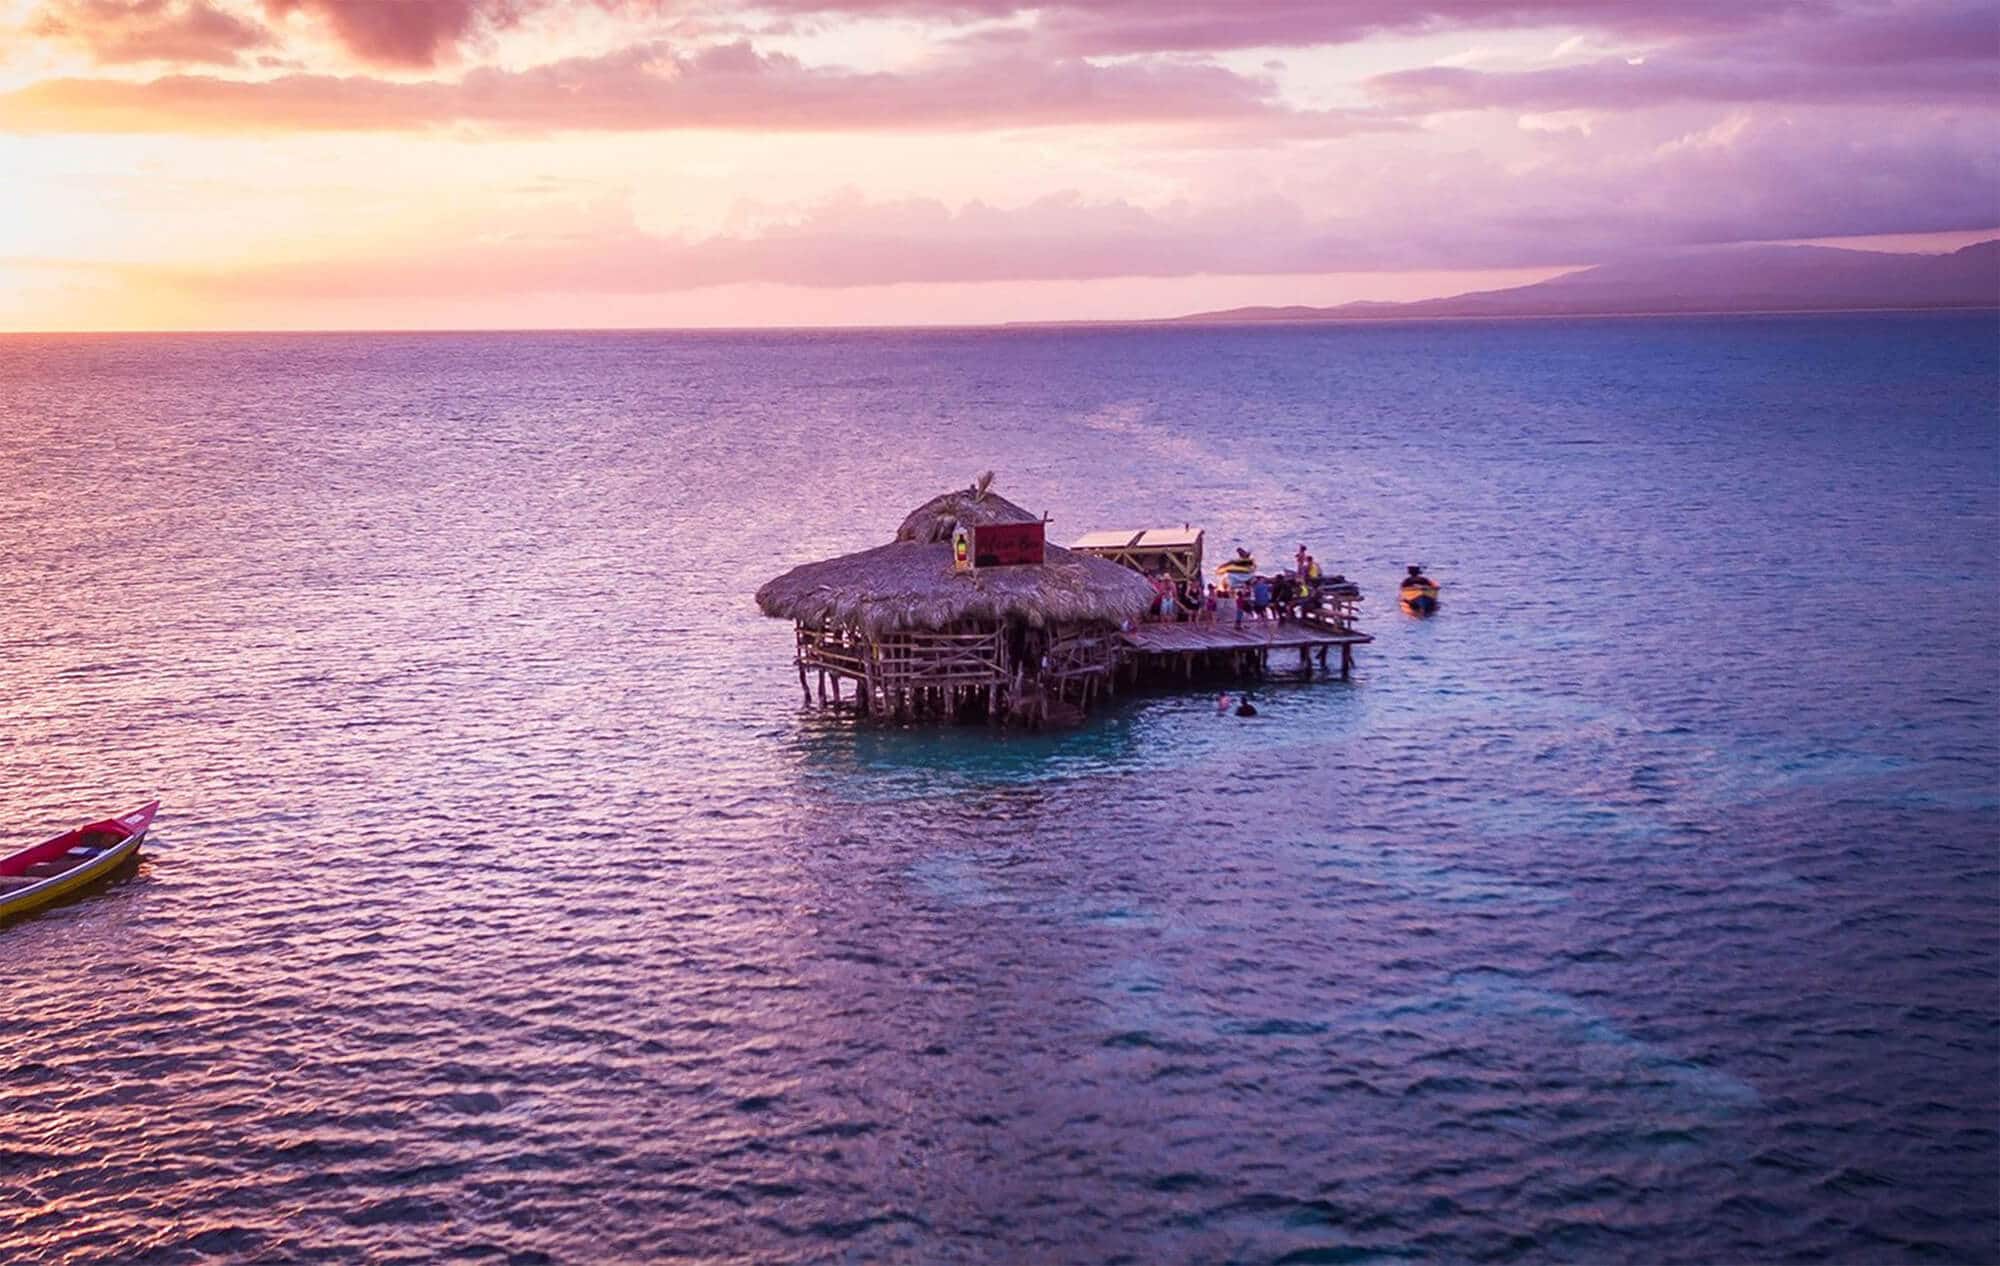 Pelican Bar in one of the worlds best vacation spots - Jamaica